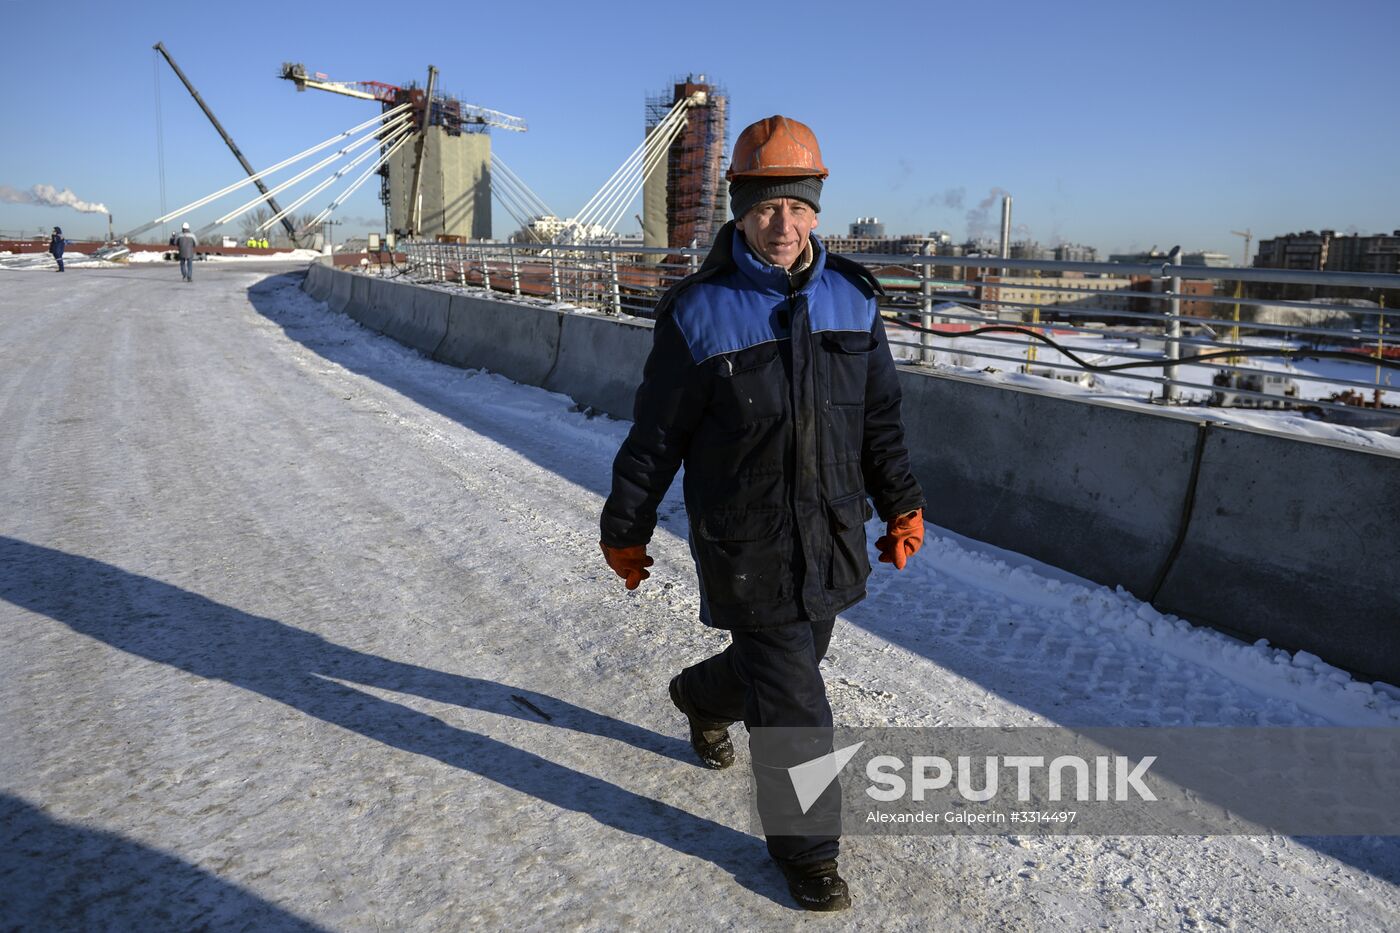 Preparation of infrastructure for 2018 FIFA World Cup in St. Petersburg